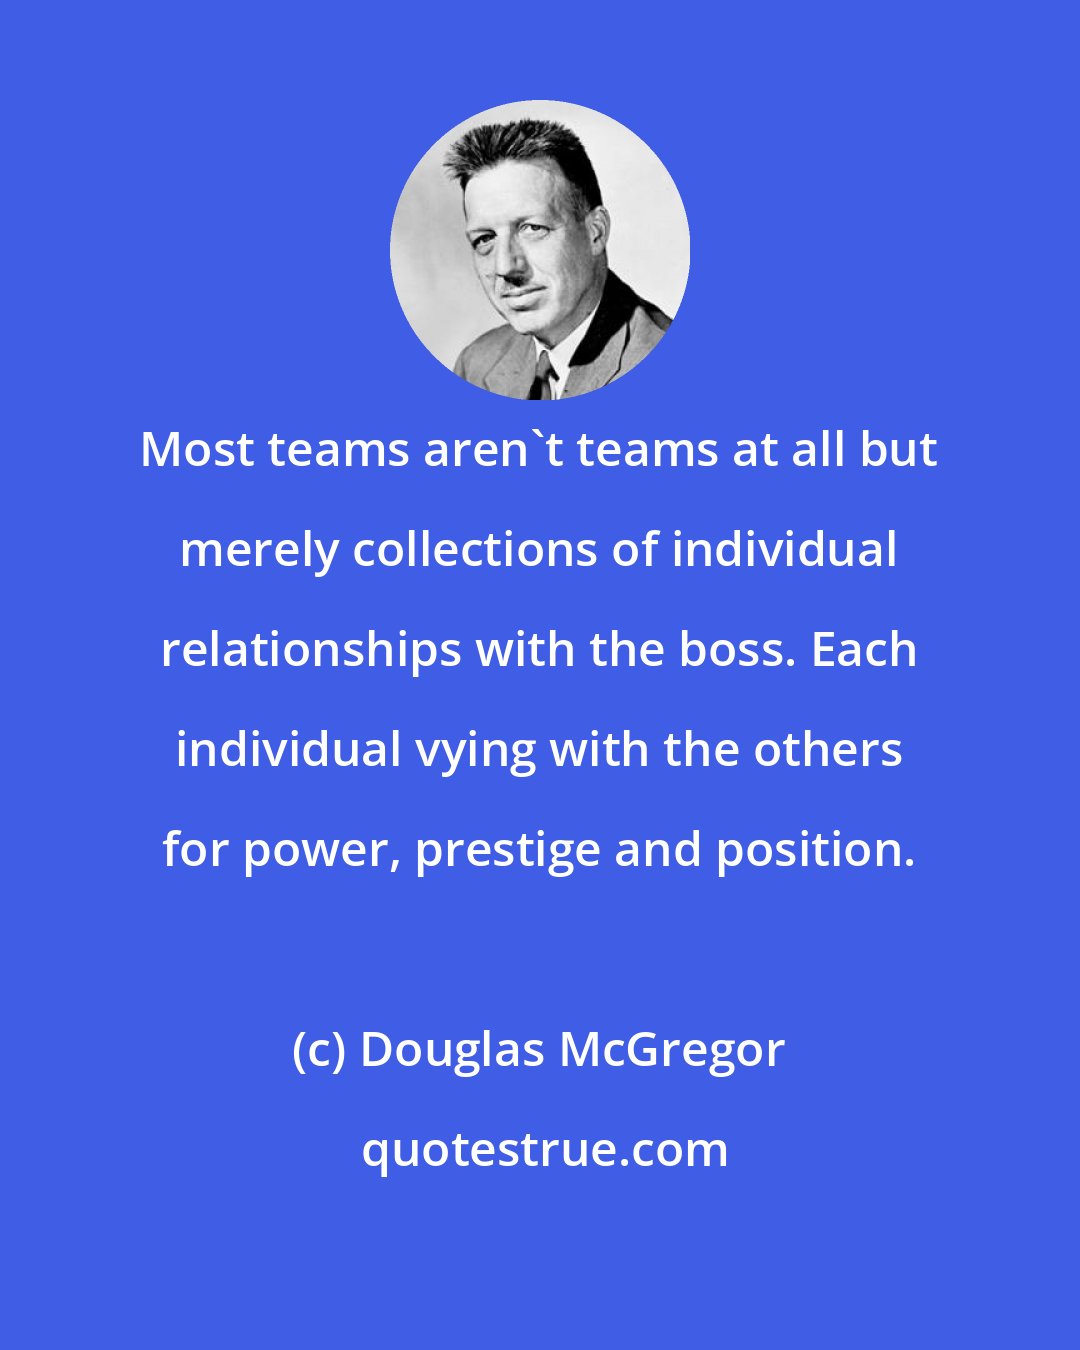 Douglas McGregor: Most teams aren't teams at all but merely collections of individual relationships with the boss. Each individual vying with the others for power, prestige and position.